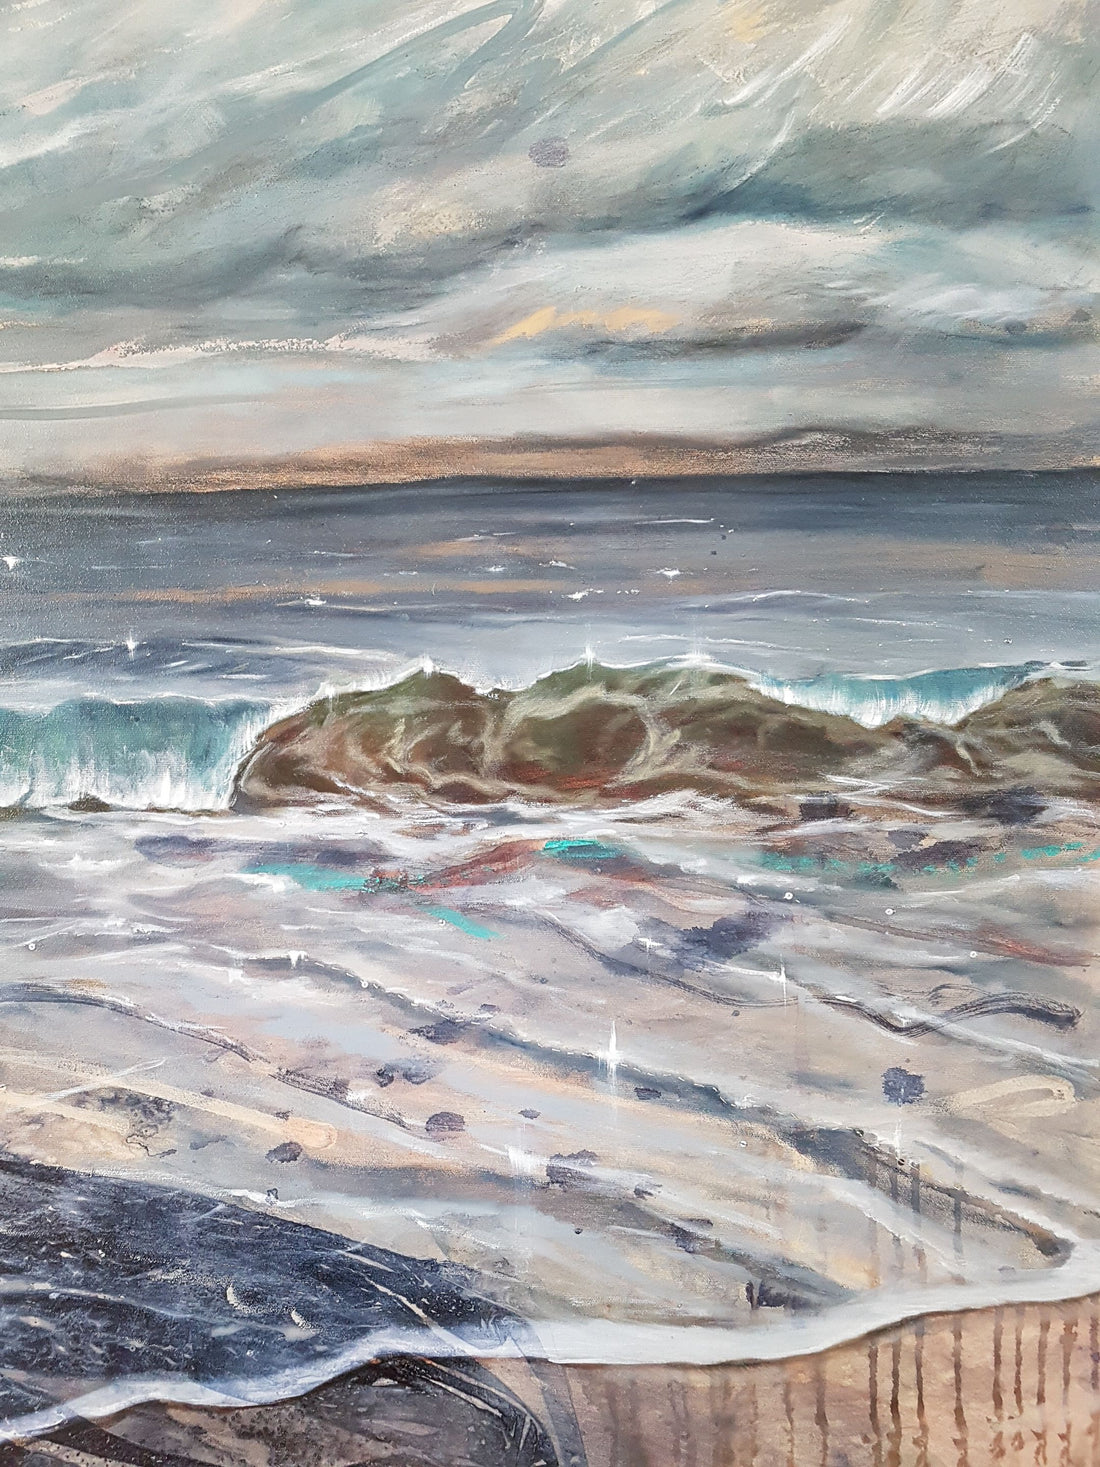 Wild Skies Upon the Waves - art by artist from Canada Grace Lane-Smith - artterra online art gallery - Buy art of Canada Online - We ship to USA and Canada